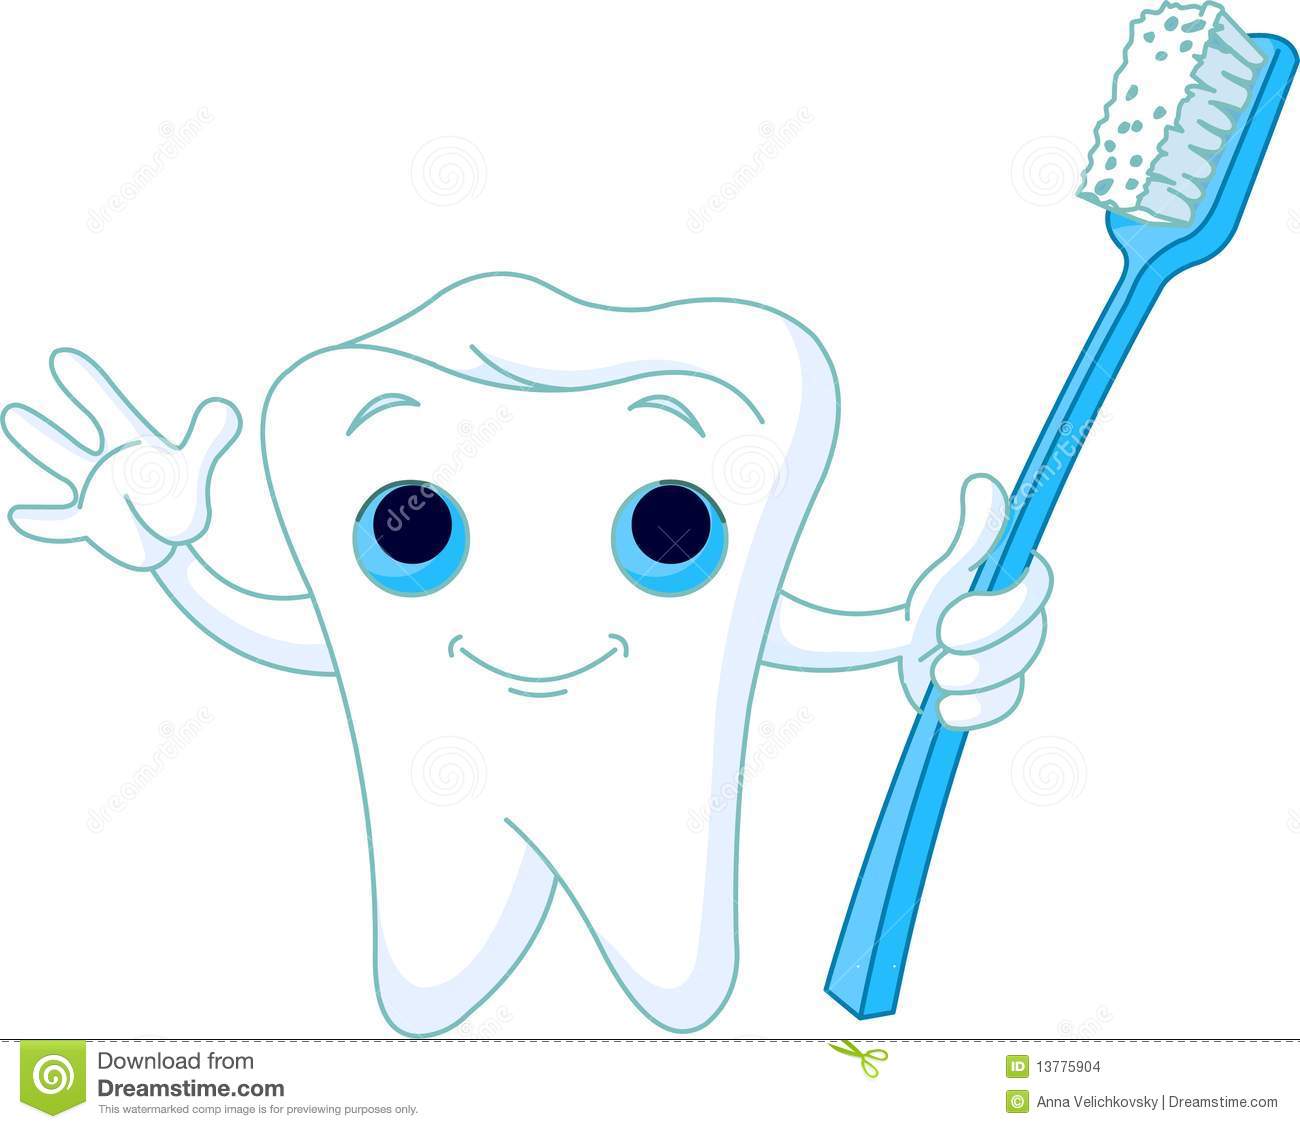 Toothy Smile Stock Images   Image  13775904